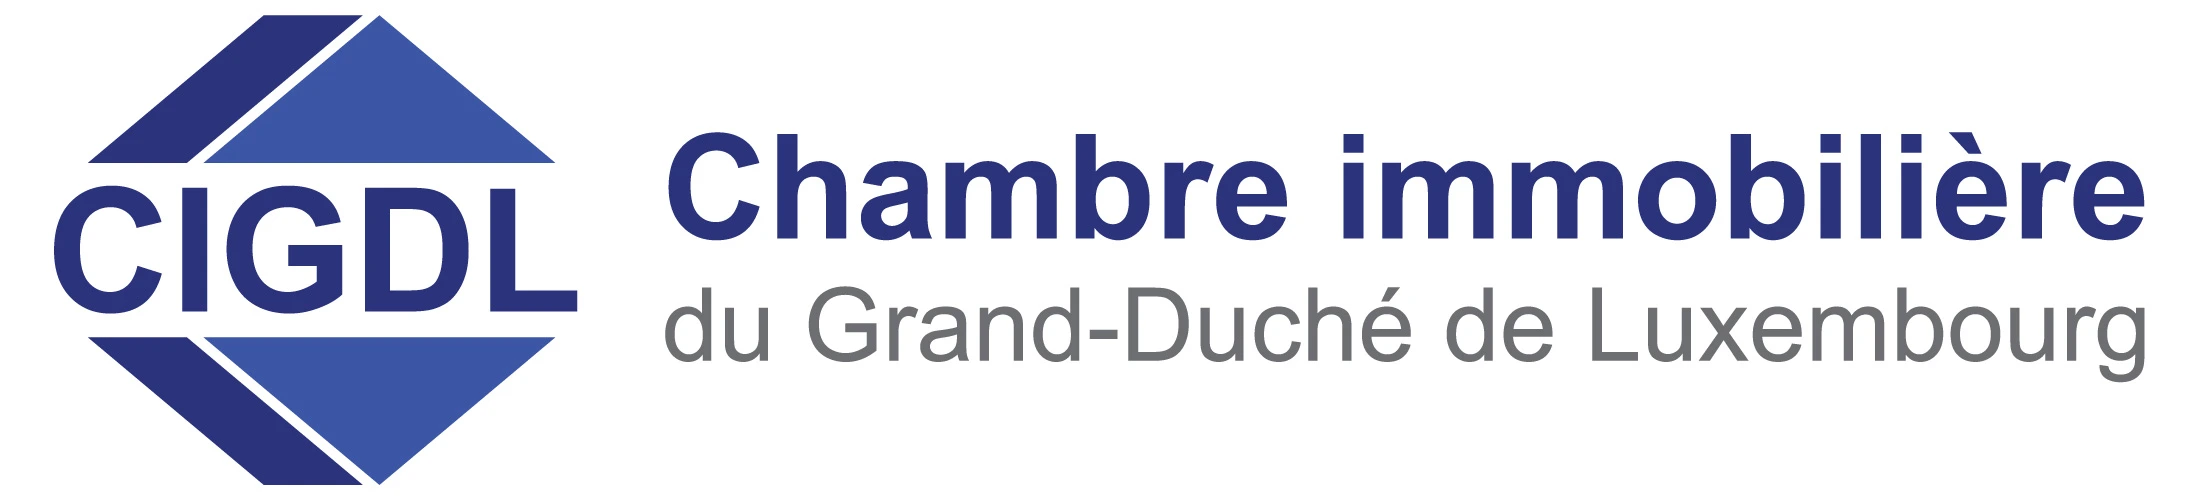 luxembourg-logo